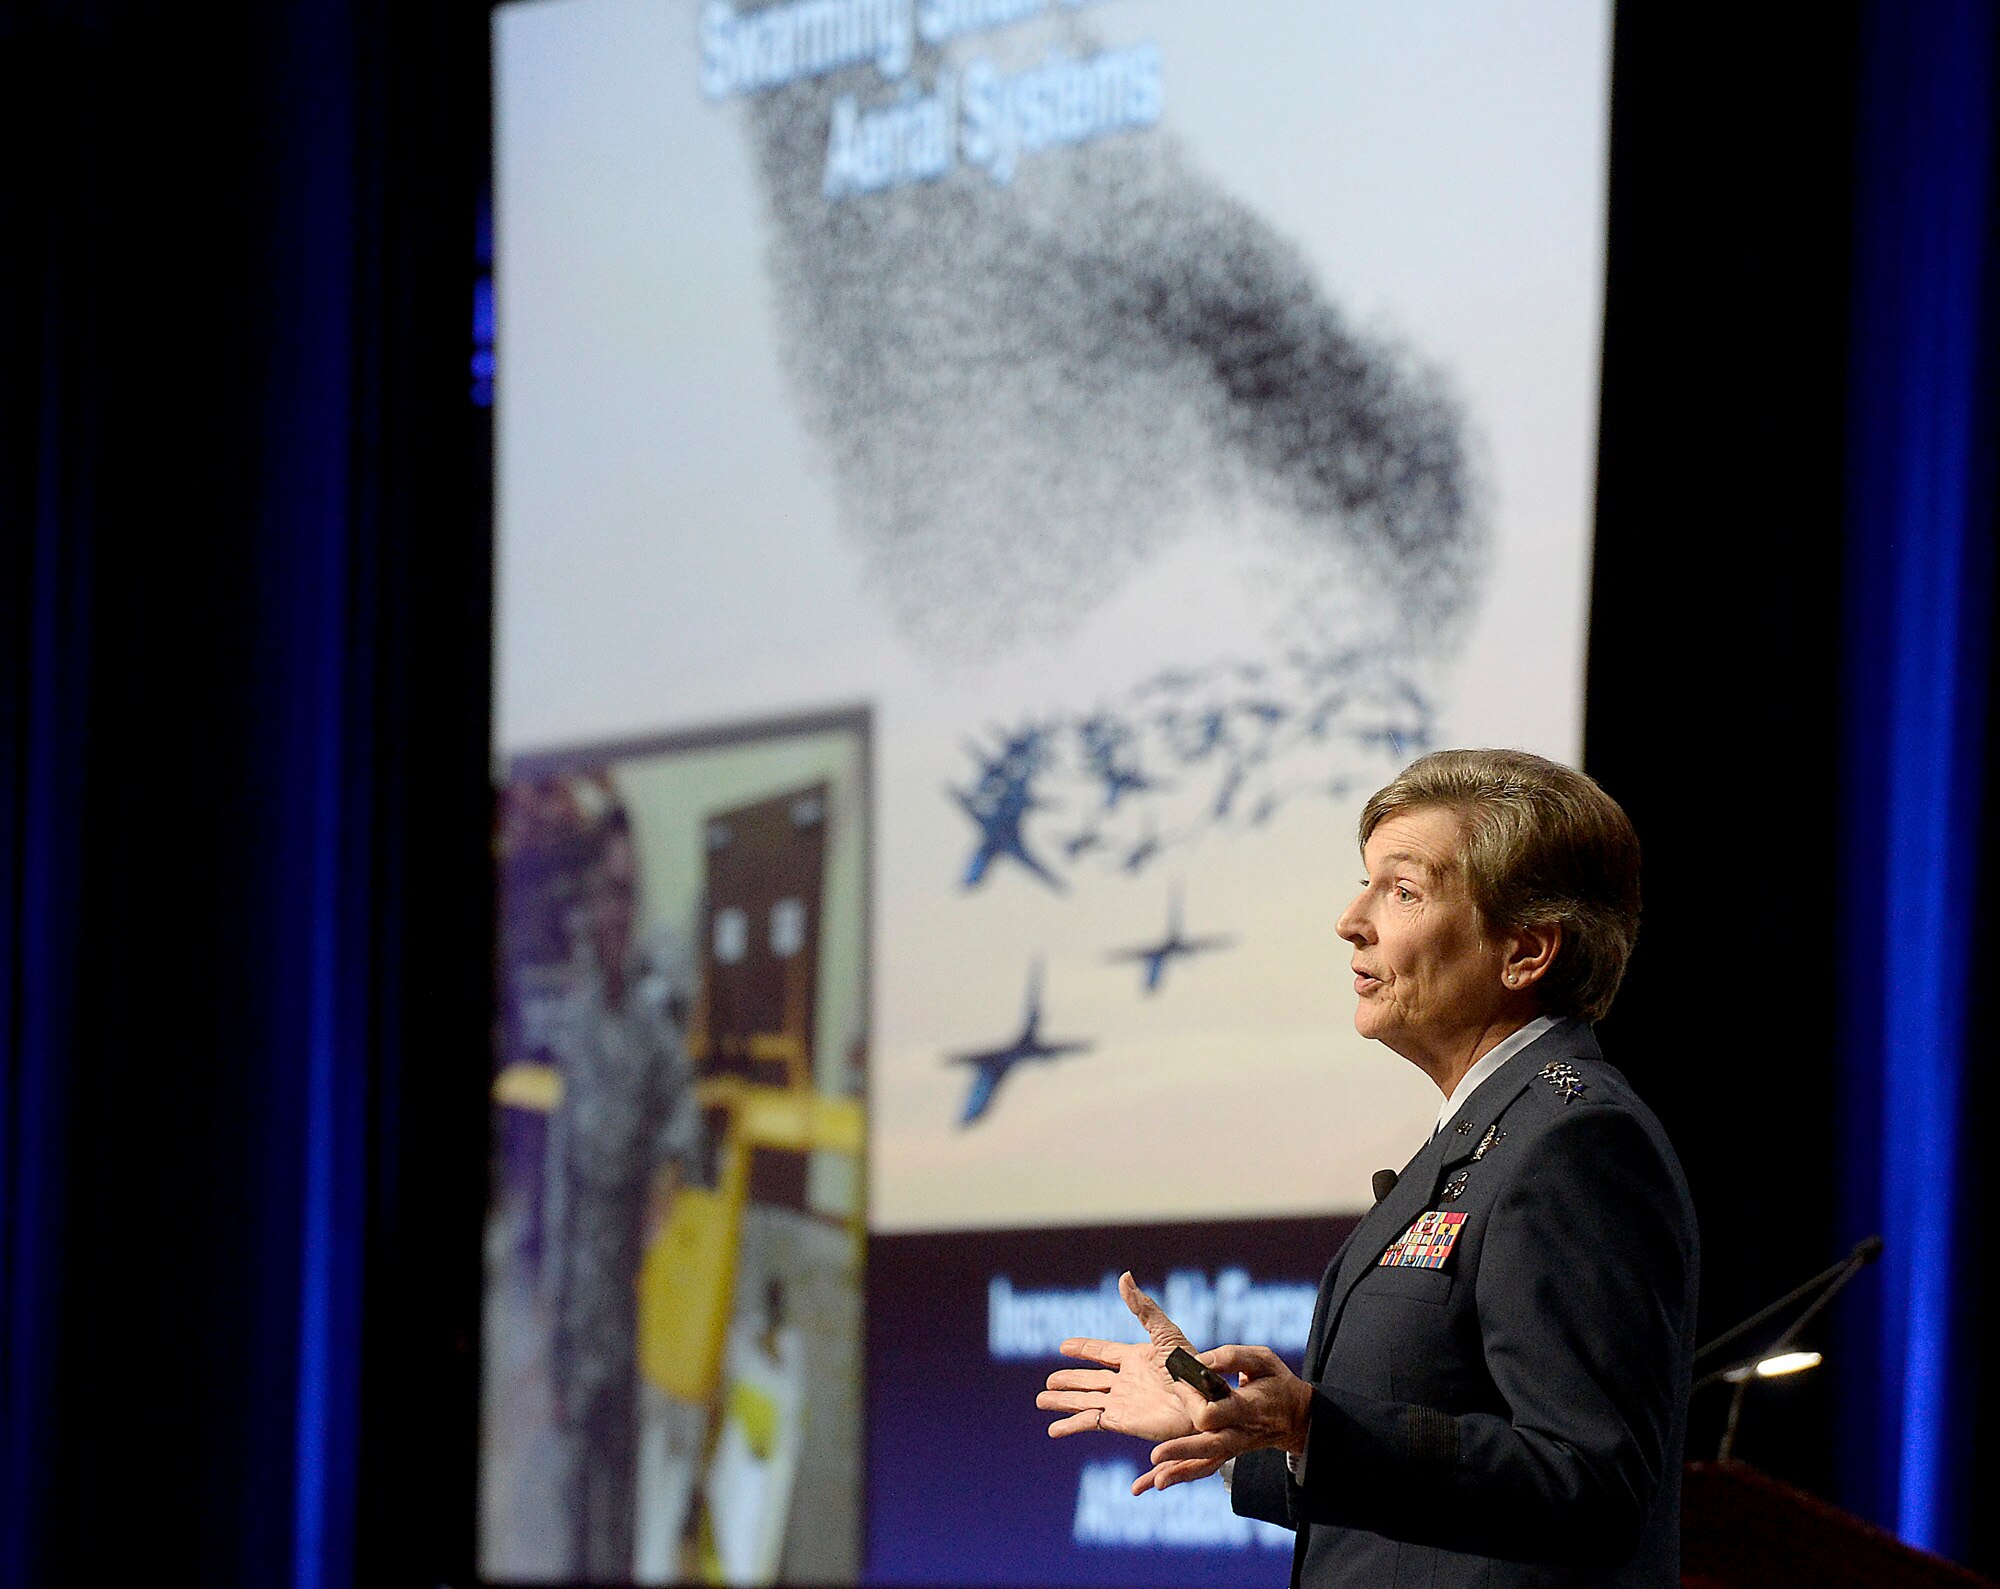 Gen. Ellen M. Pawlikowski, commander of the Air Force Materiel Command, speaks about her command's flexibility and how it directly impacts the total force's operations and strategic agility at the Air Force Association Air and Space Conference and Technology Exposition Sept. 15, 2015, in Washington, D.C. (U.S. Air Force photo/Scott M. Ash) 